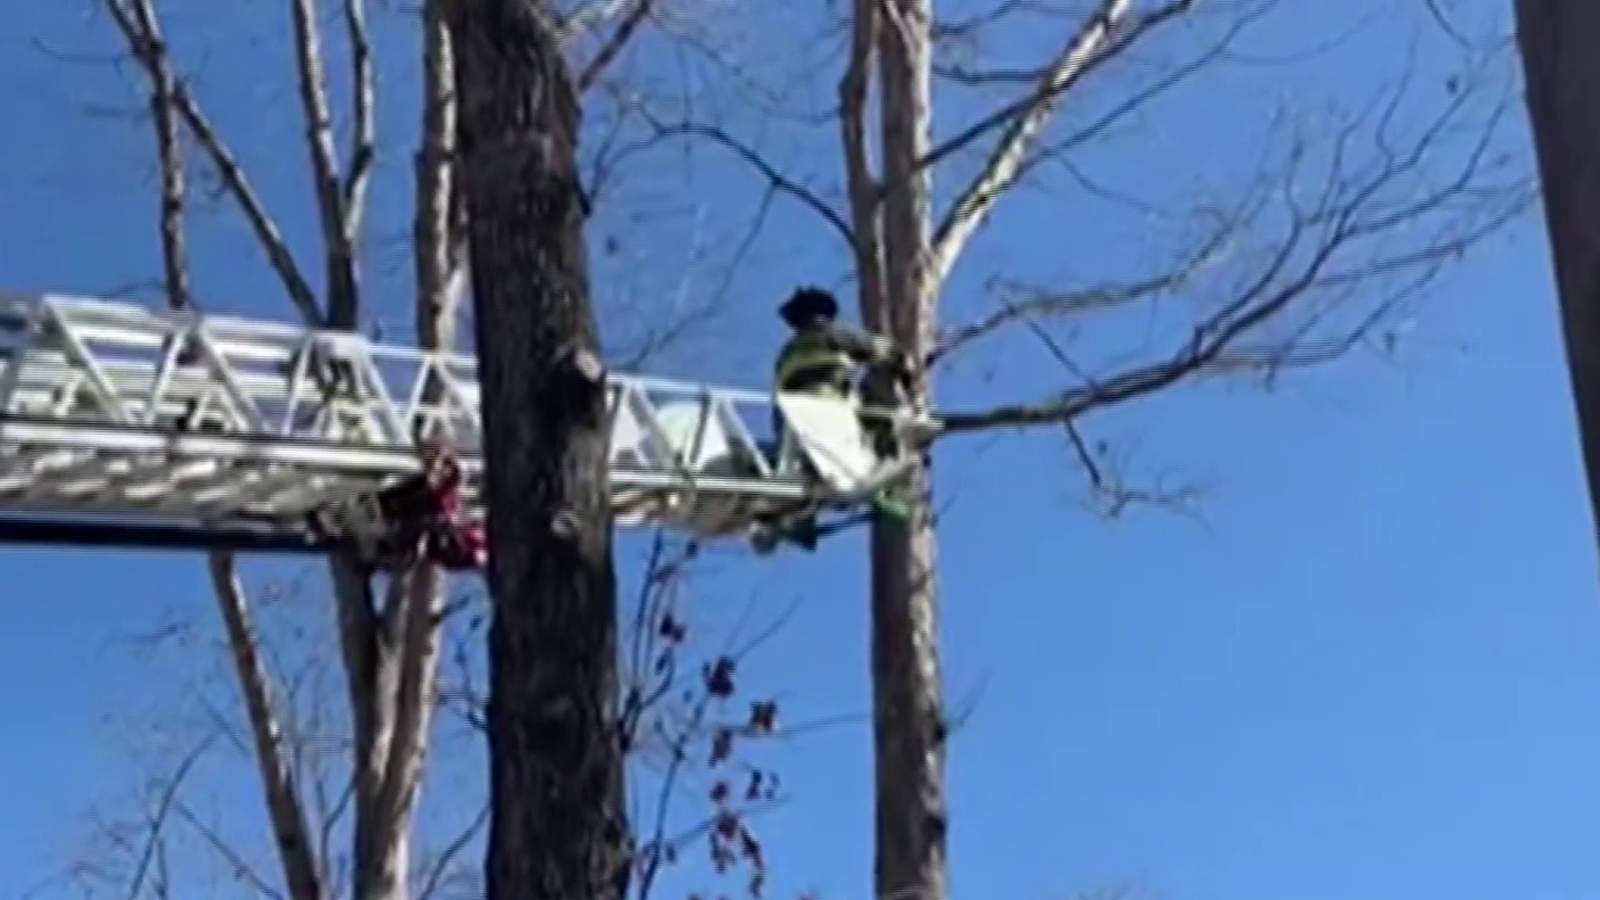 Local firefighter climbs 30 feet to rescue cat stuck in tree